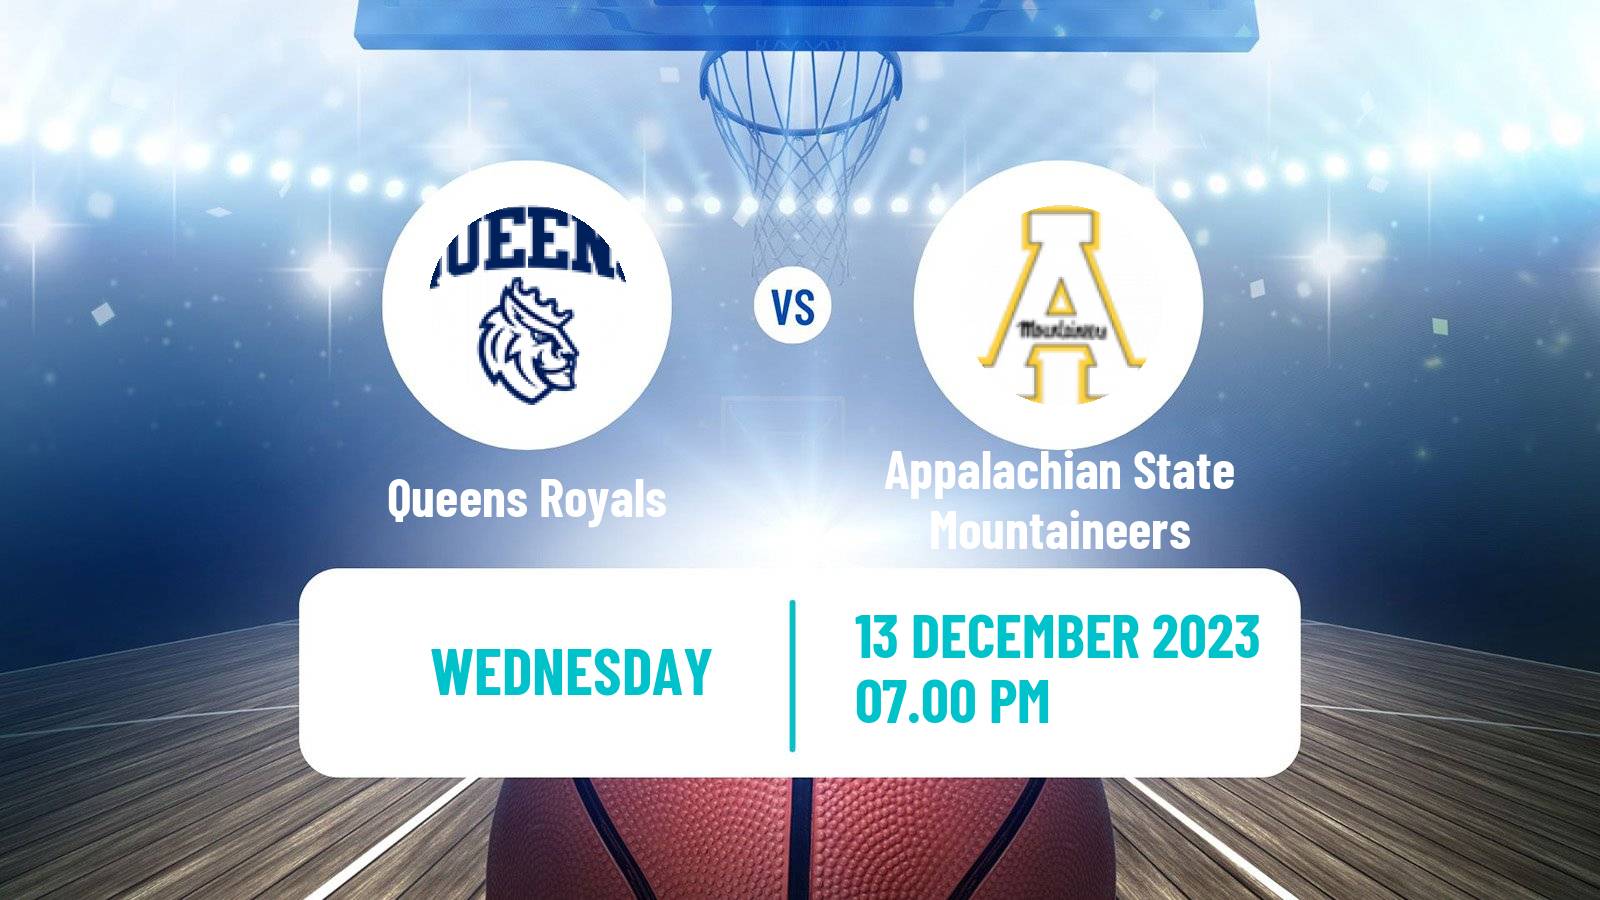 Basketball NCAA College Basketball Queens Royals - Appalachian State Mountaineers